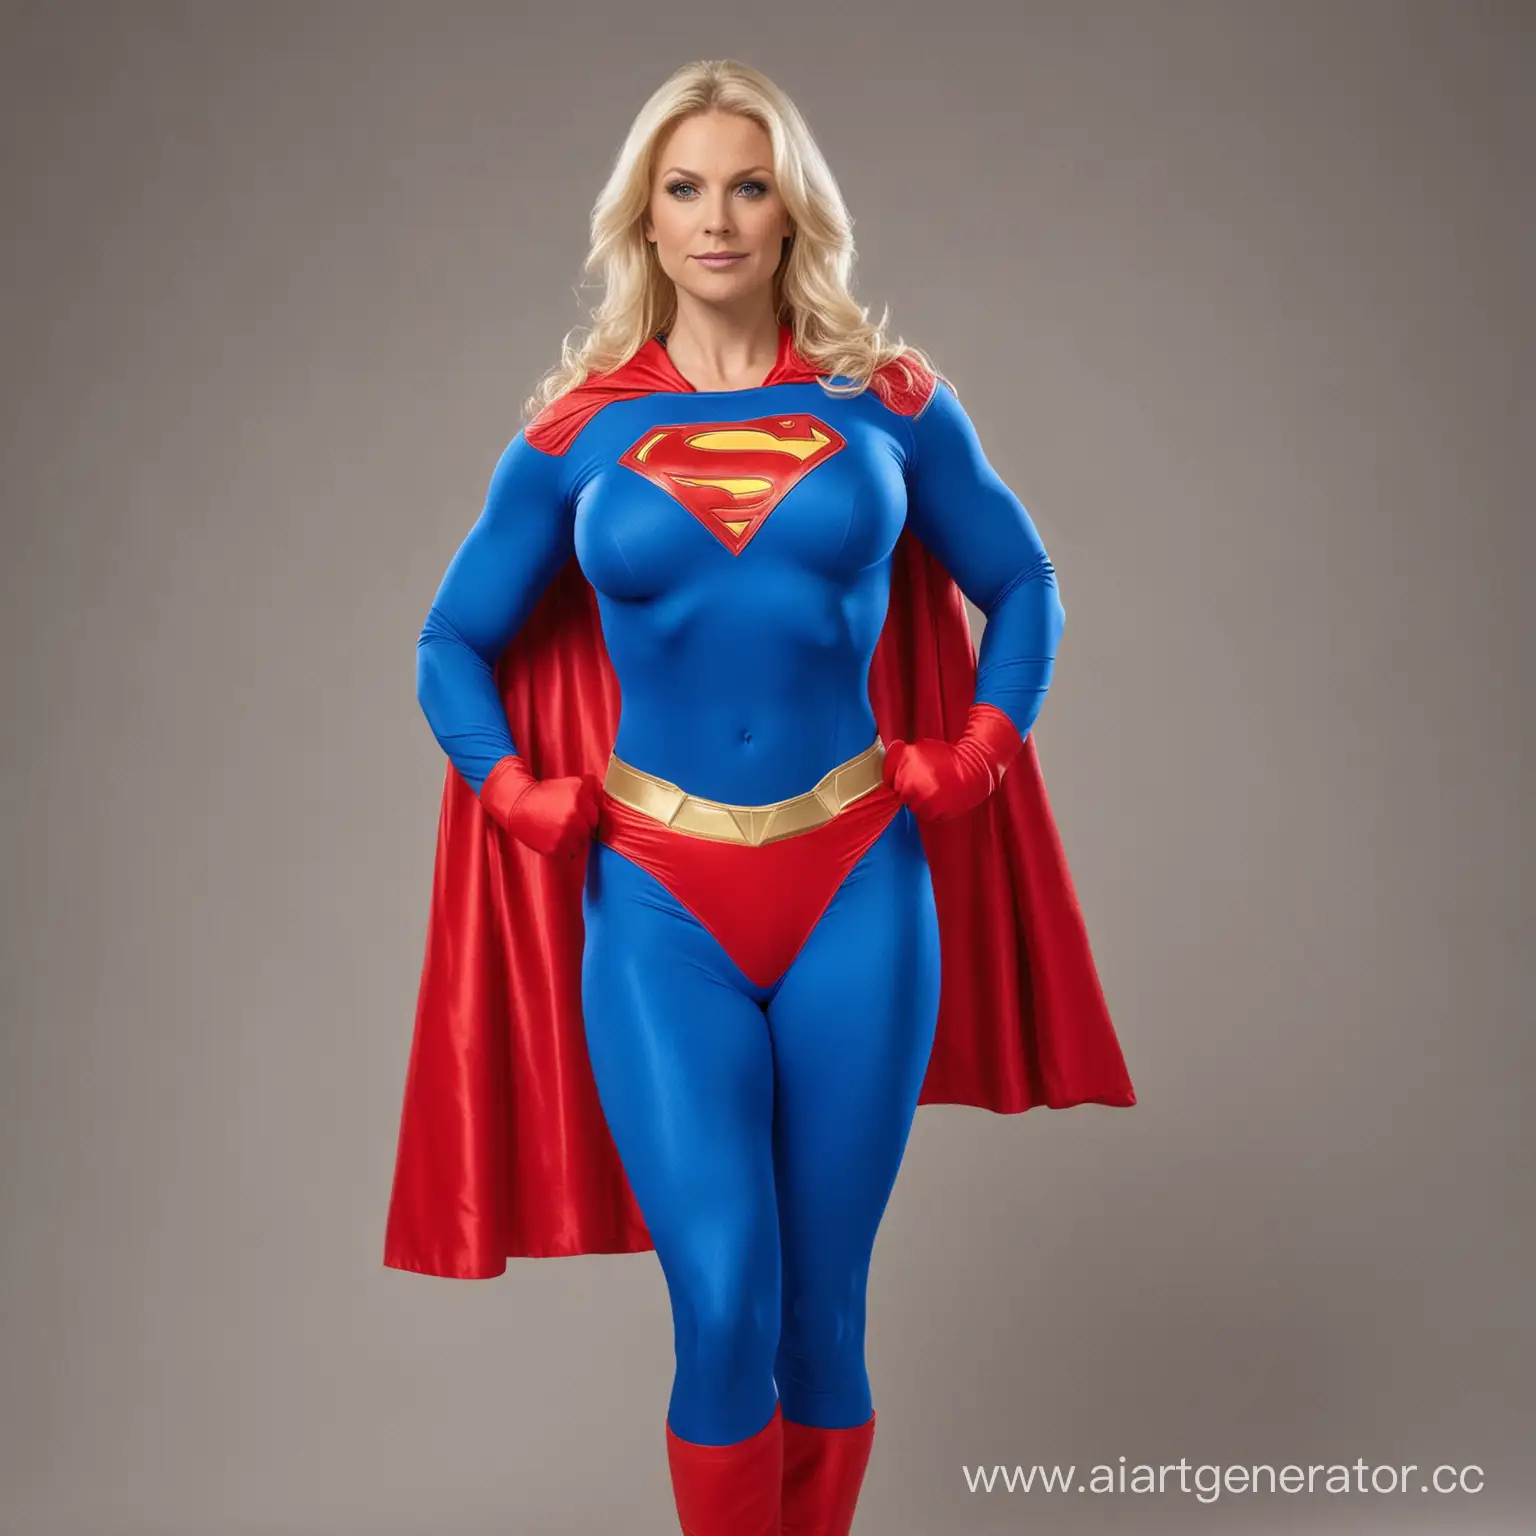 Blonde, super woman, bright blue costume, bright red cape, huge muscles flexing, huge breasts, milf